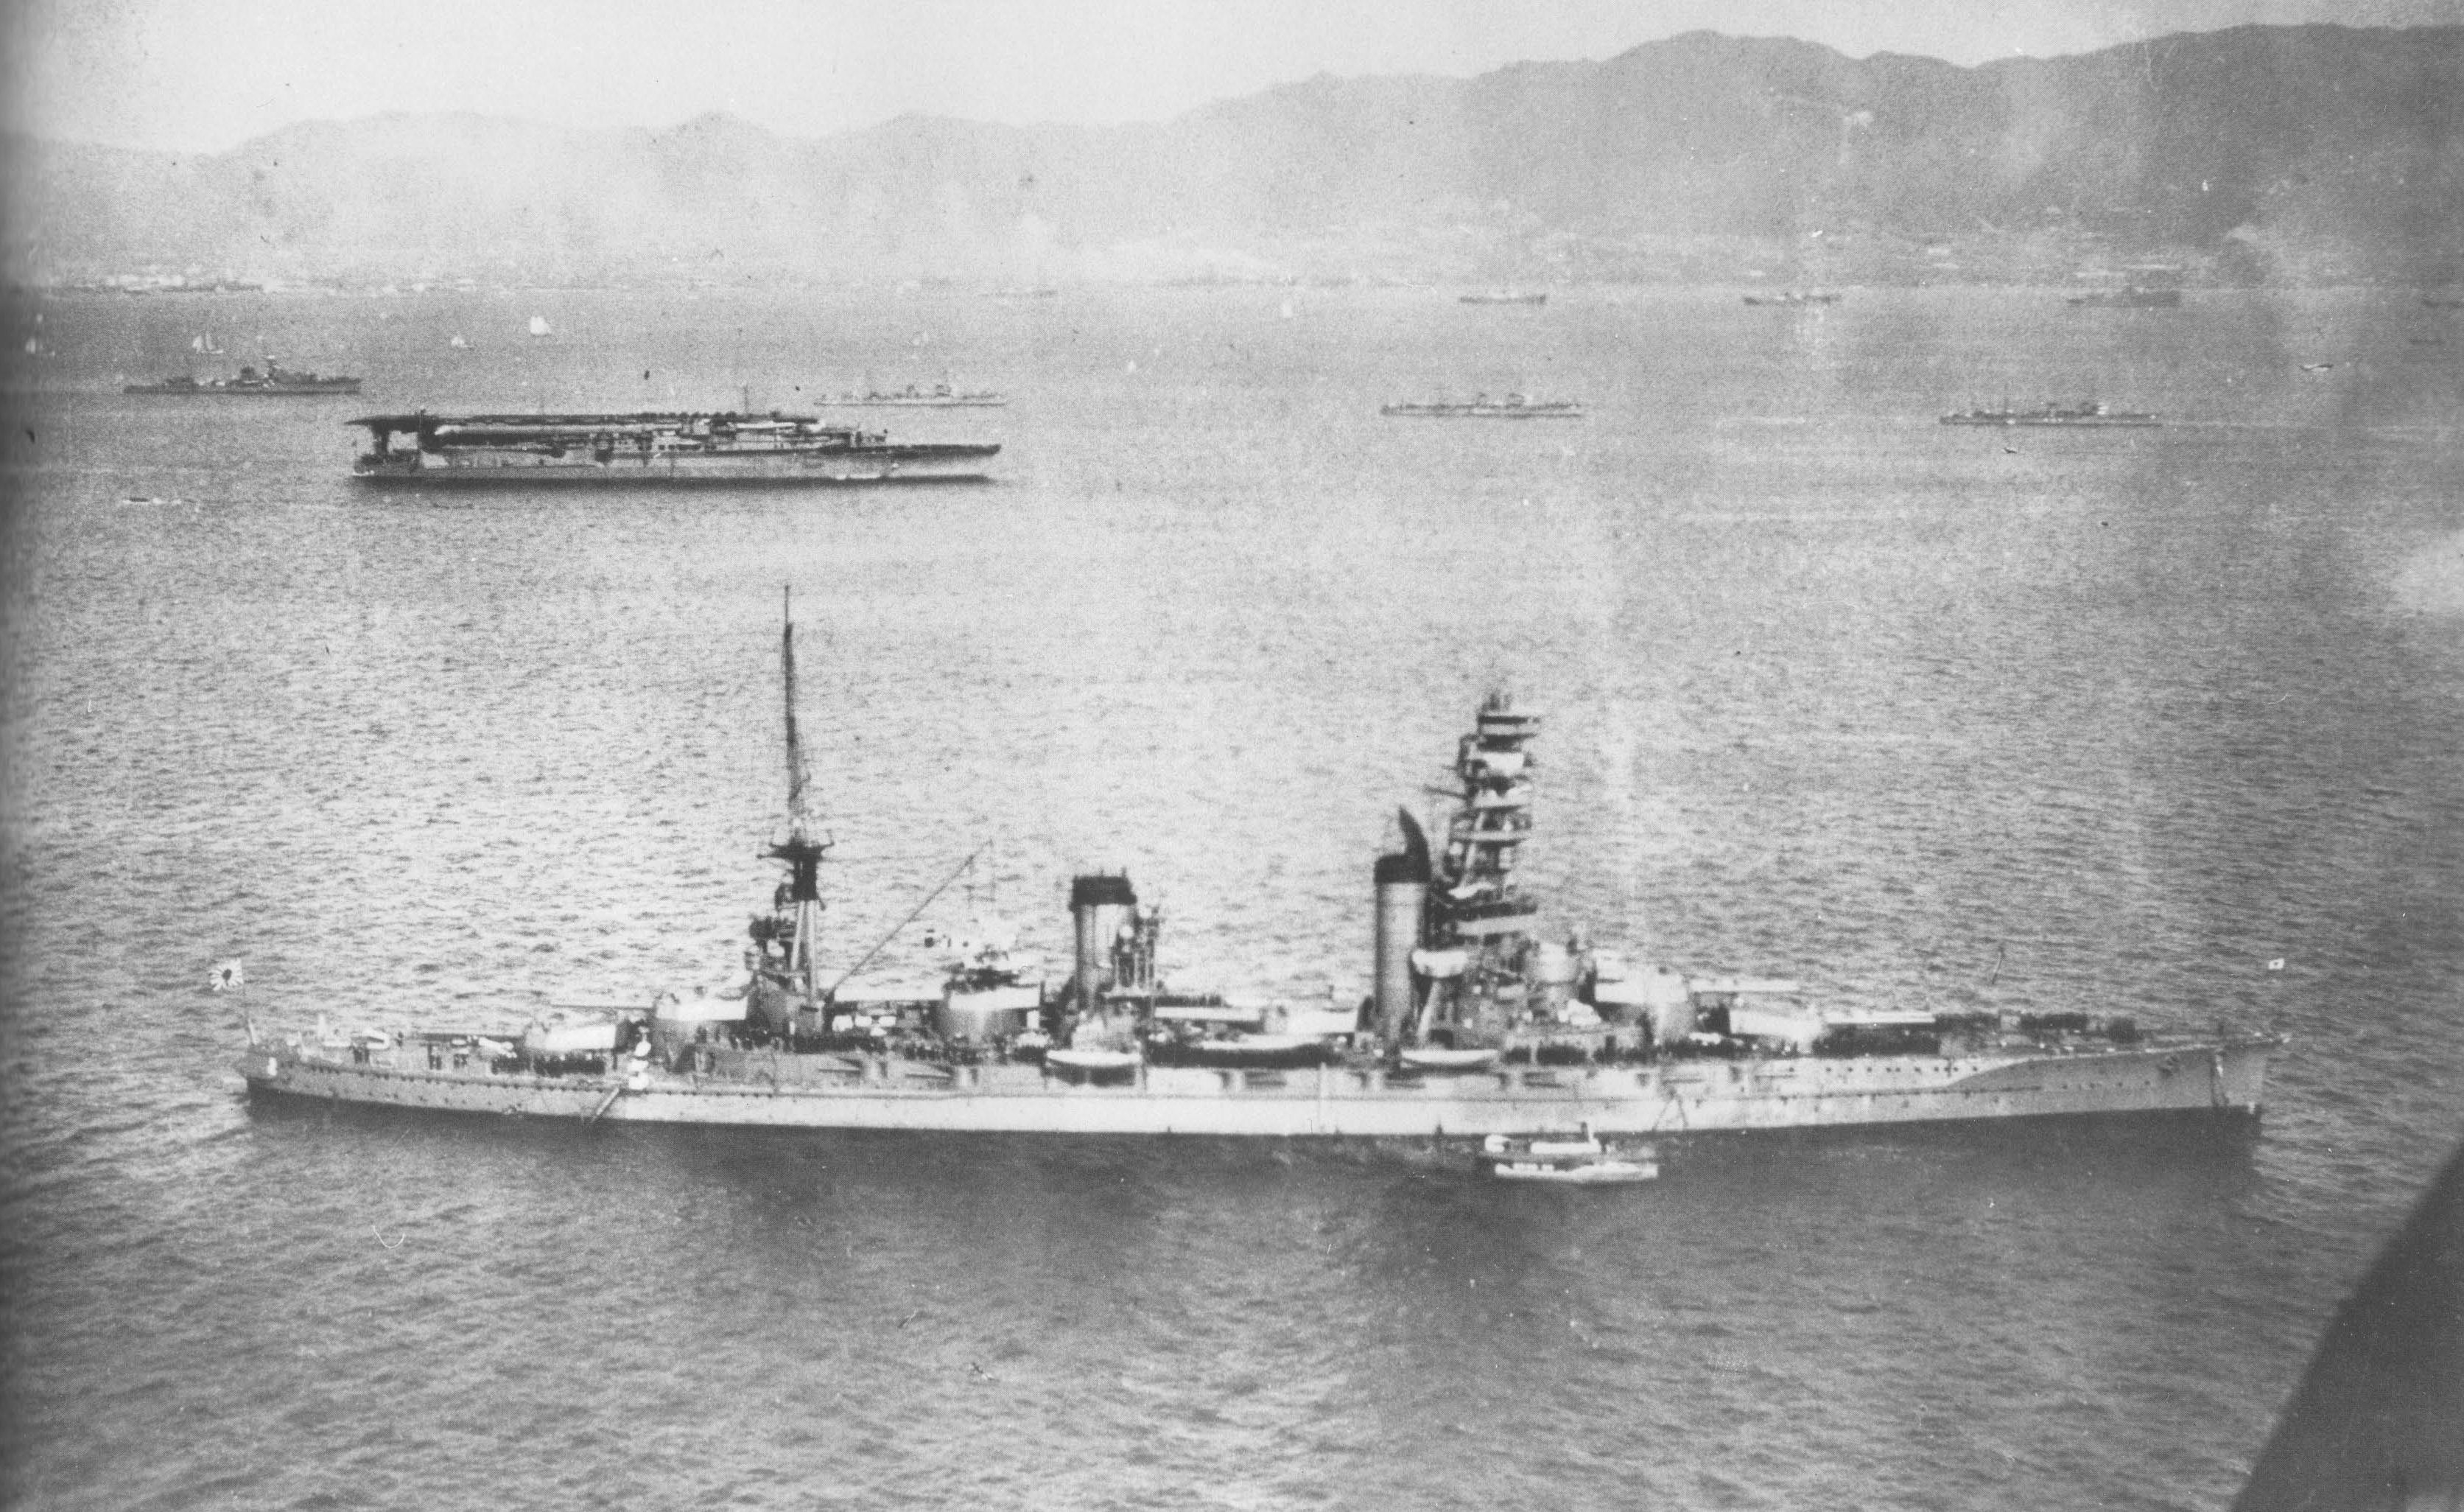 Battleship Yamashiro and carrier Kaga in Kobe Bay, Japan, 22-23 Oct 1930; they were gathering for a fleet review